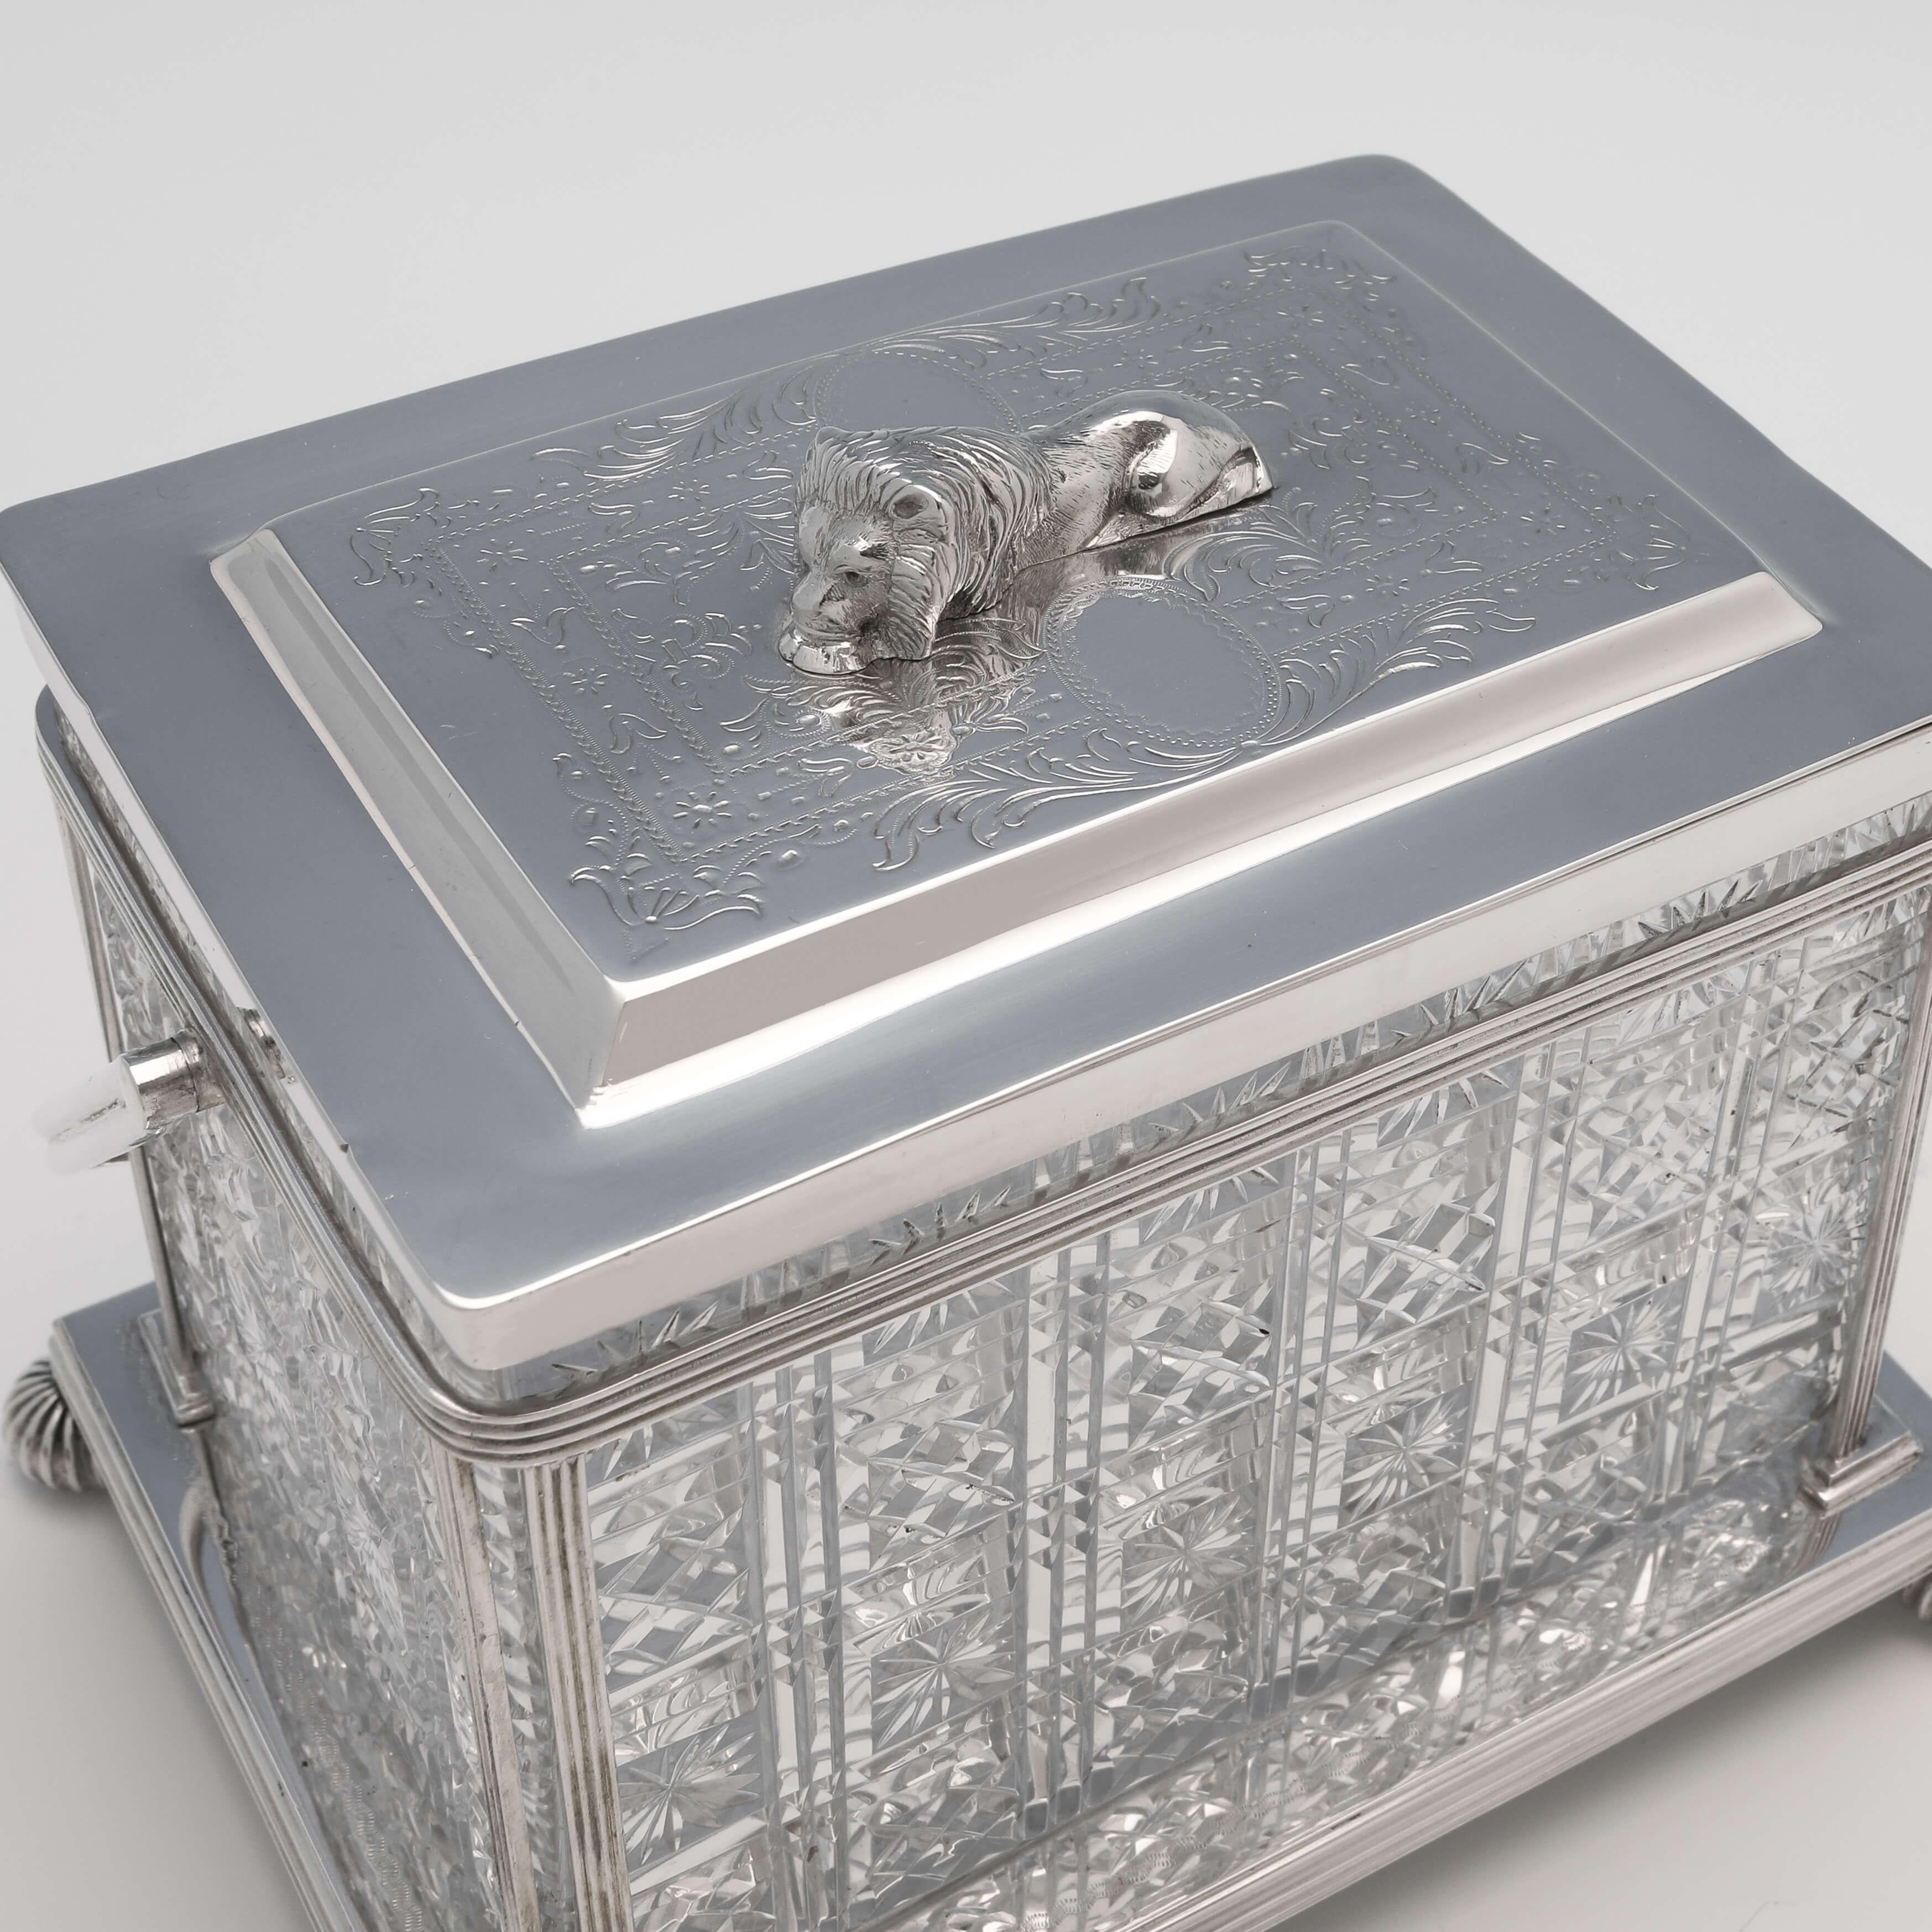 Made circa 1880 by Cooper Brothers & Sons, this attractive, Victorian, antique silver plate biscuit box, is rectangular in shape, and features a cut class body, engraved decoration to the lid, and a recumbent lion finial. The biscuit box measures